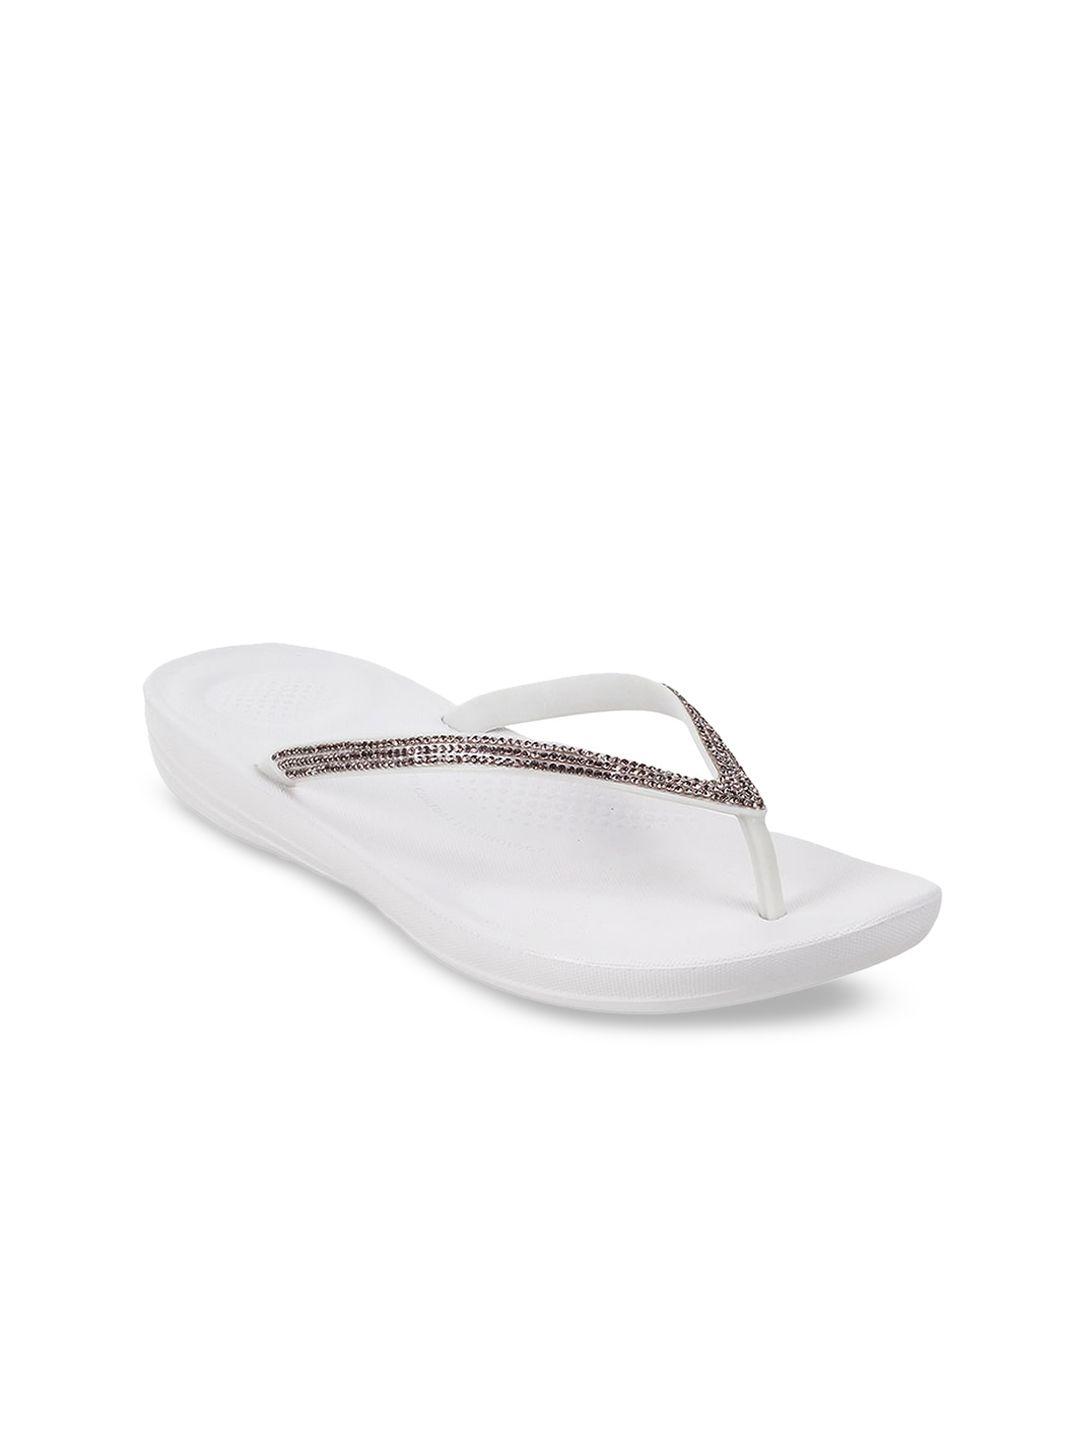 fitflop women white embellished flats